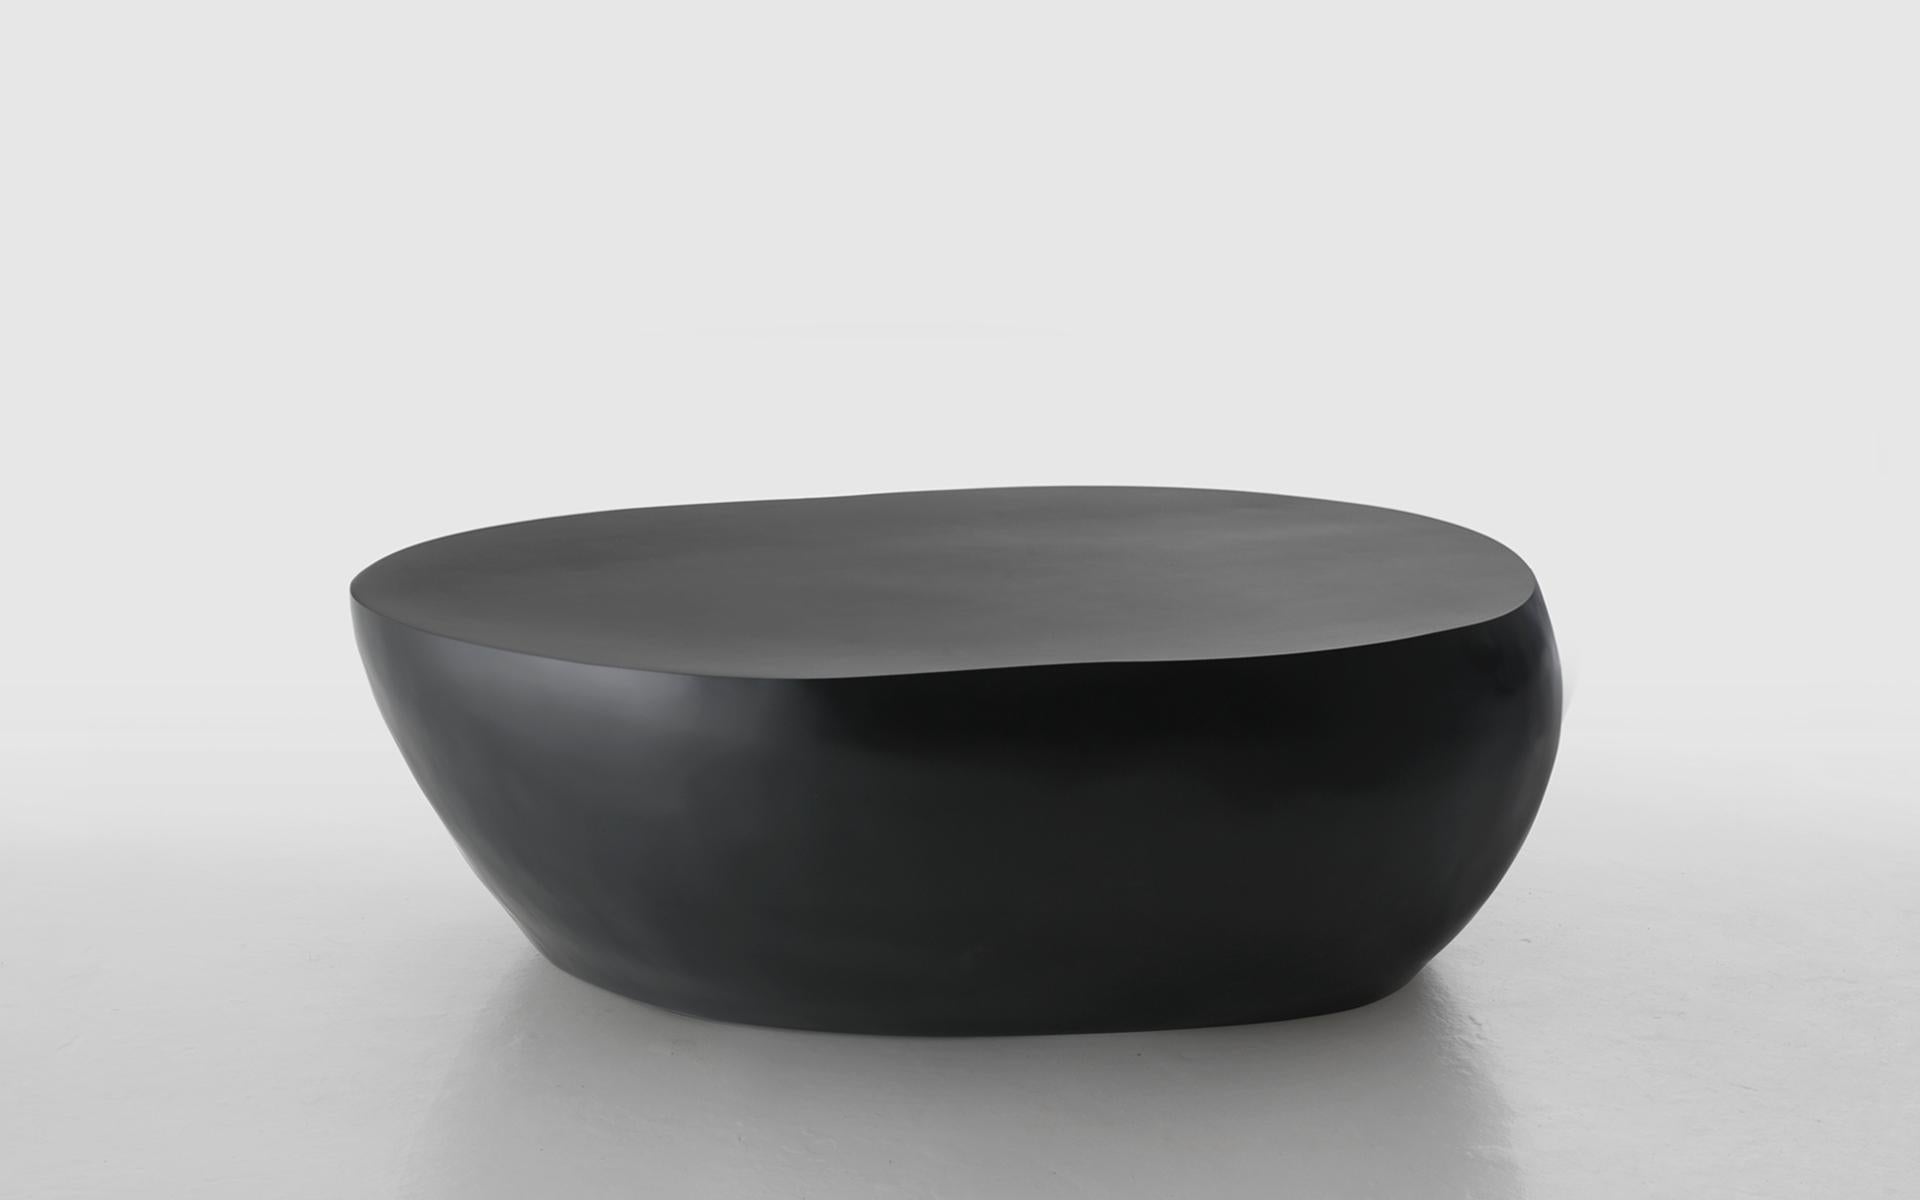 Slab coffee table by Imperfettolab
2011
Dimensions: 106 x 78 x H 34
Materials: Fibreglass
Available in black and white.

Seat/Coffee table in fibreglass.

Imperfetto Lab
Who we are ? We are a family.
Verter Turroni, Emanuela Ravelli and